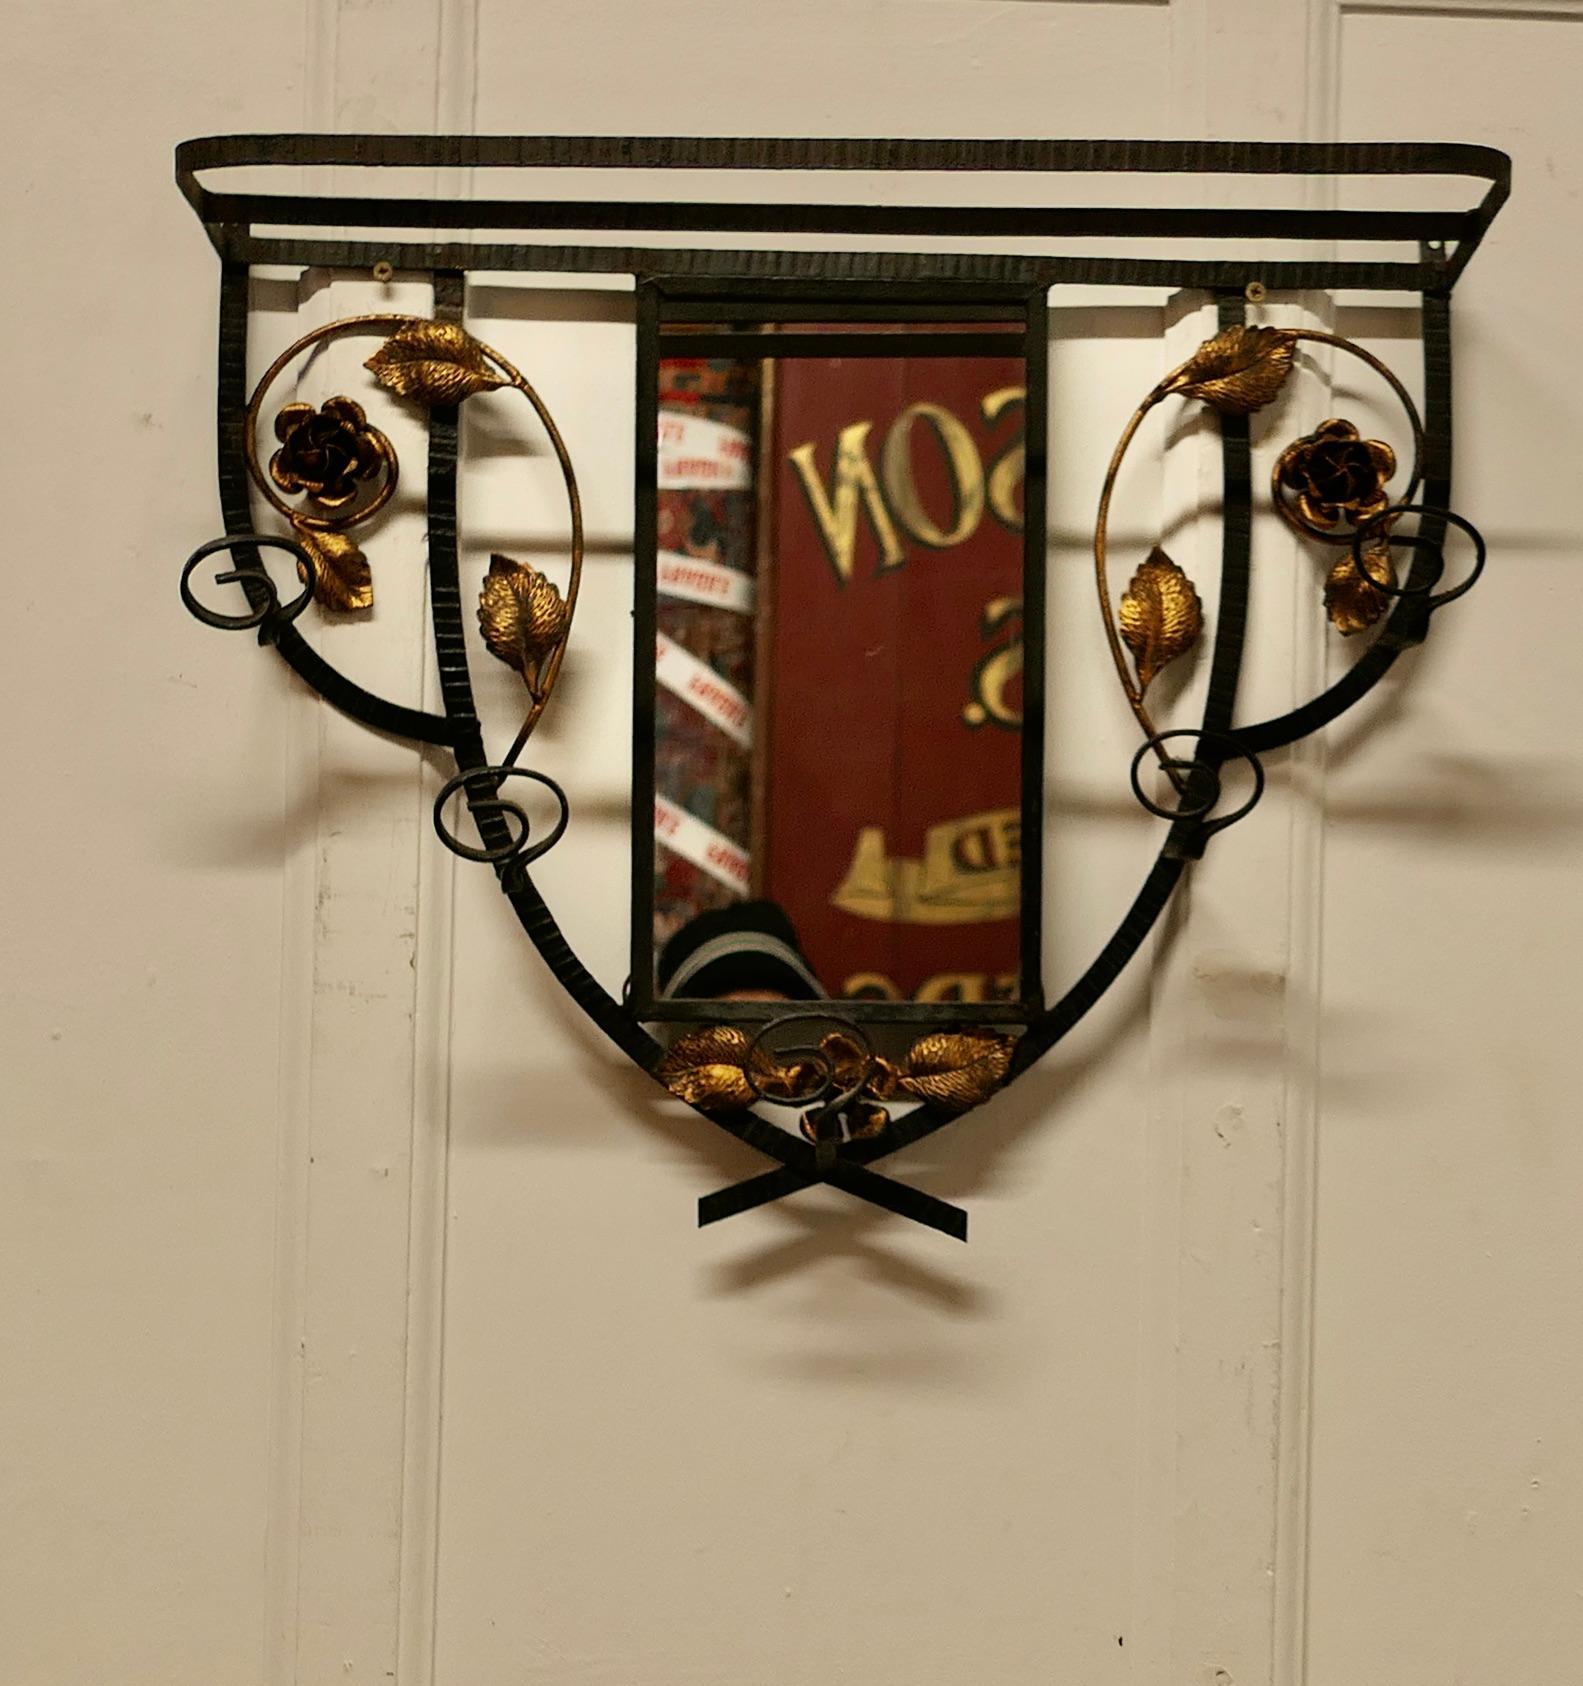 French Iron and Gilt Hall Coat Hooks with Mirror 

This is an attractive wall hanging shelf with 5 coat hooks, it has decorative gilt roast and leaf decoration and a central mirror
The Rack is 24” long, 19” high and 9” deep
TSC62